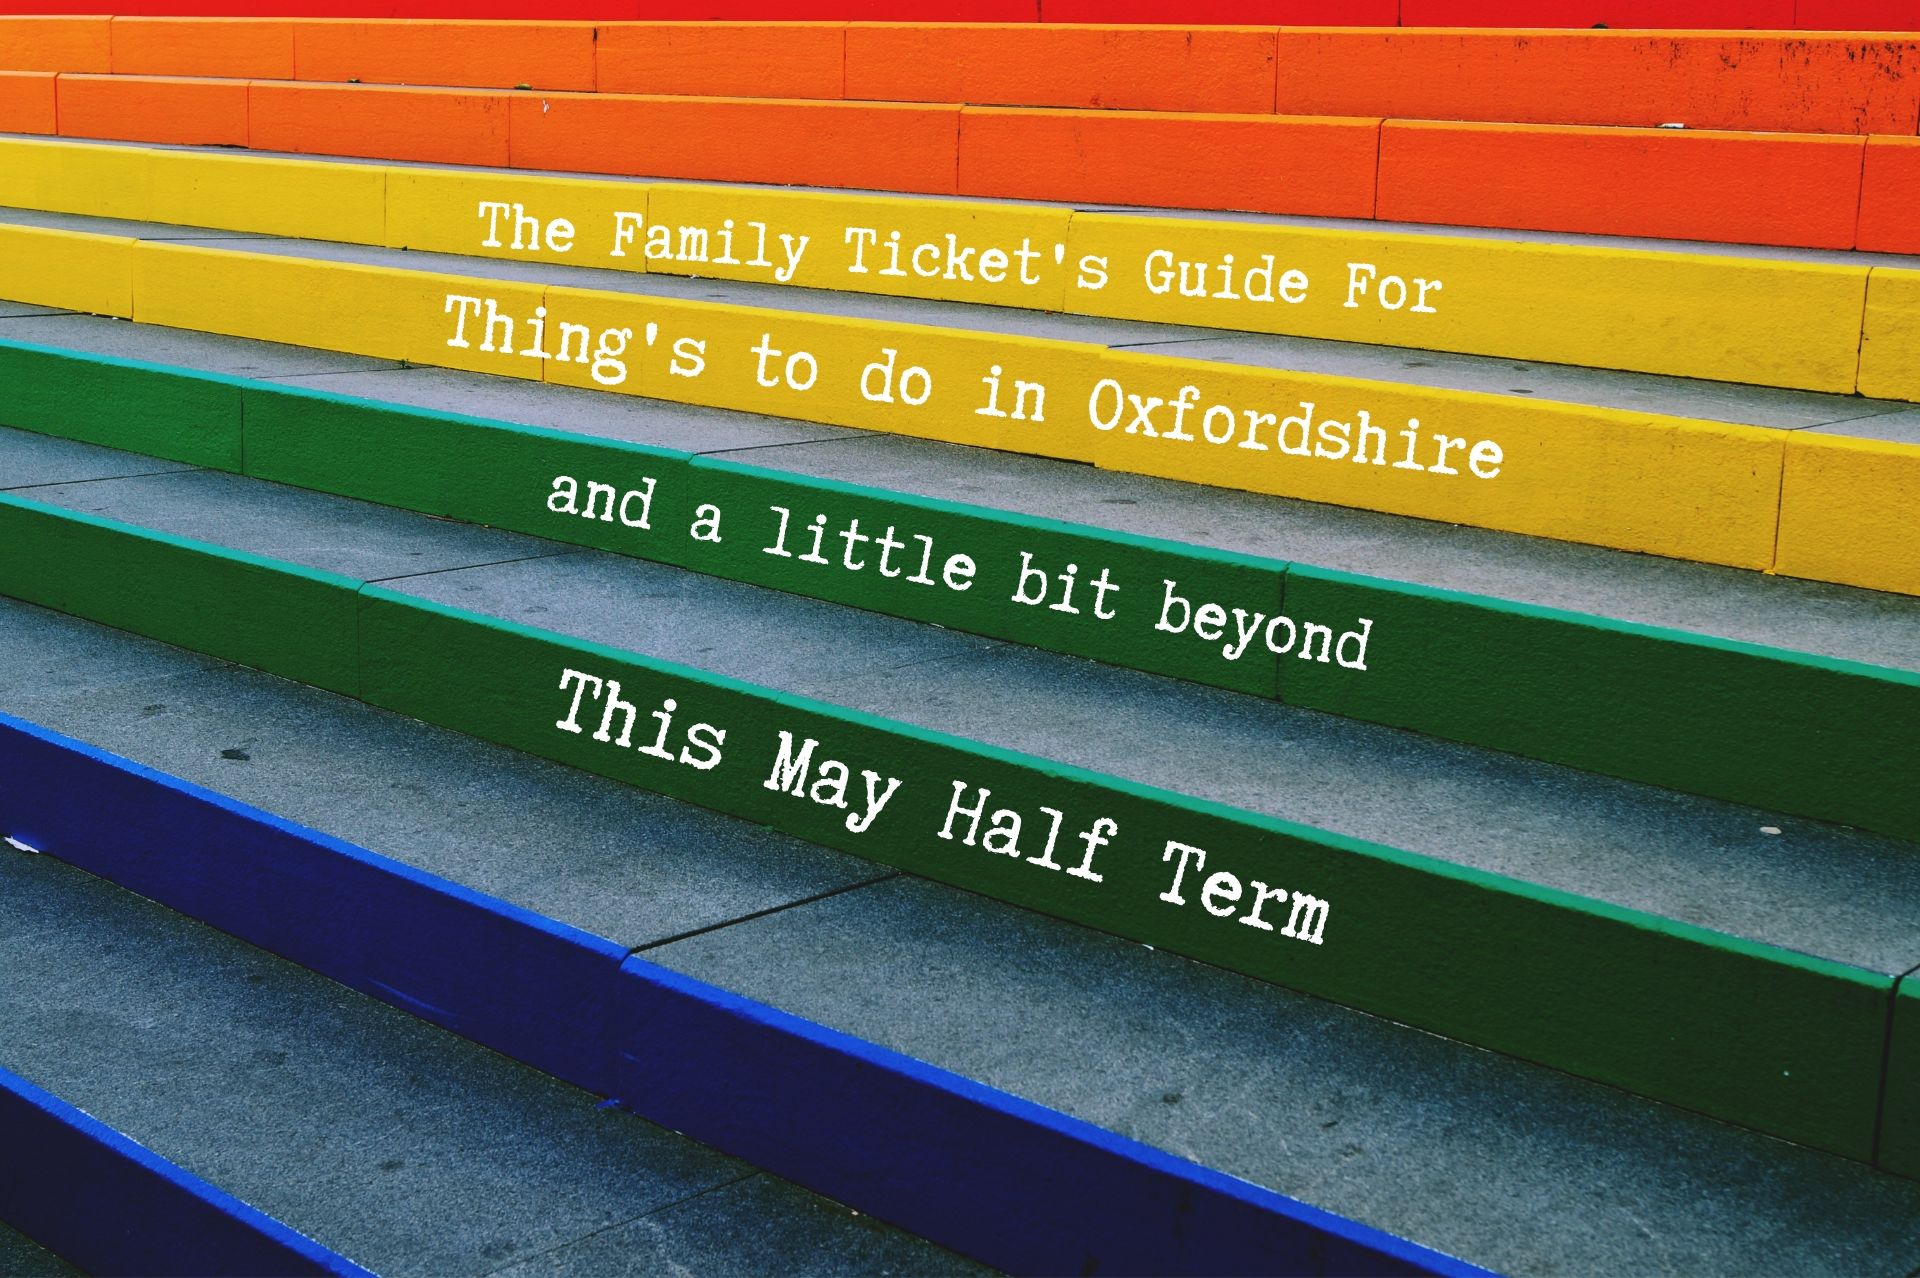 Things to do in Oxfordshire for may half term